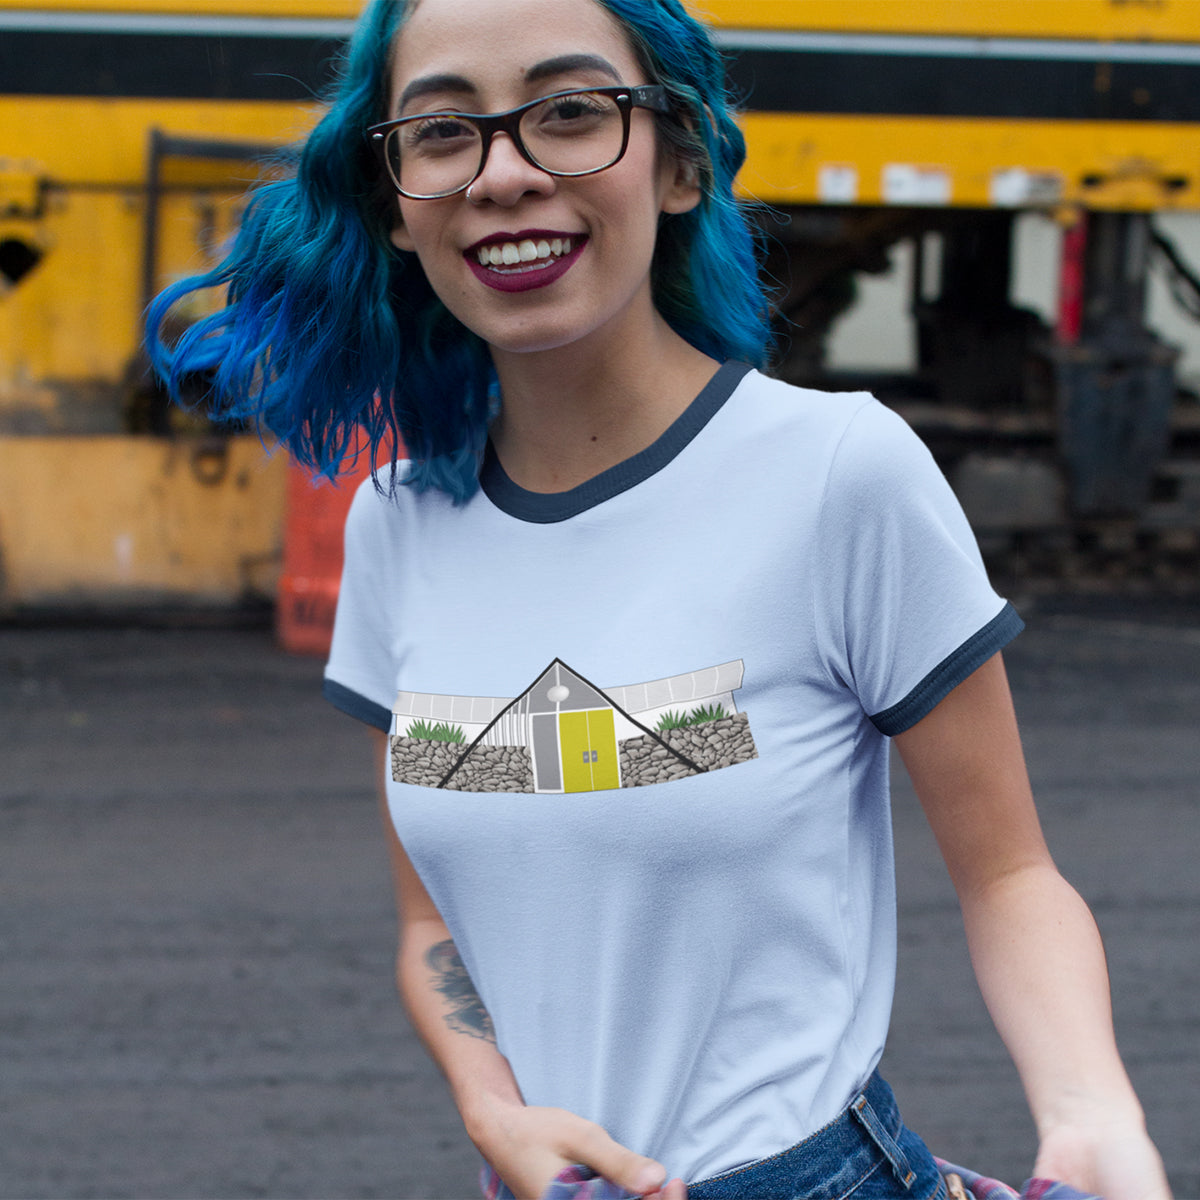 Smiling girl with blue hair and glasses walking on street wearing jeans and T-shirt.